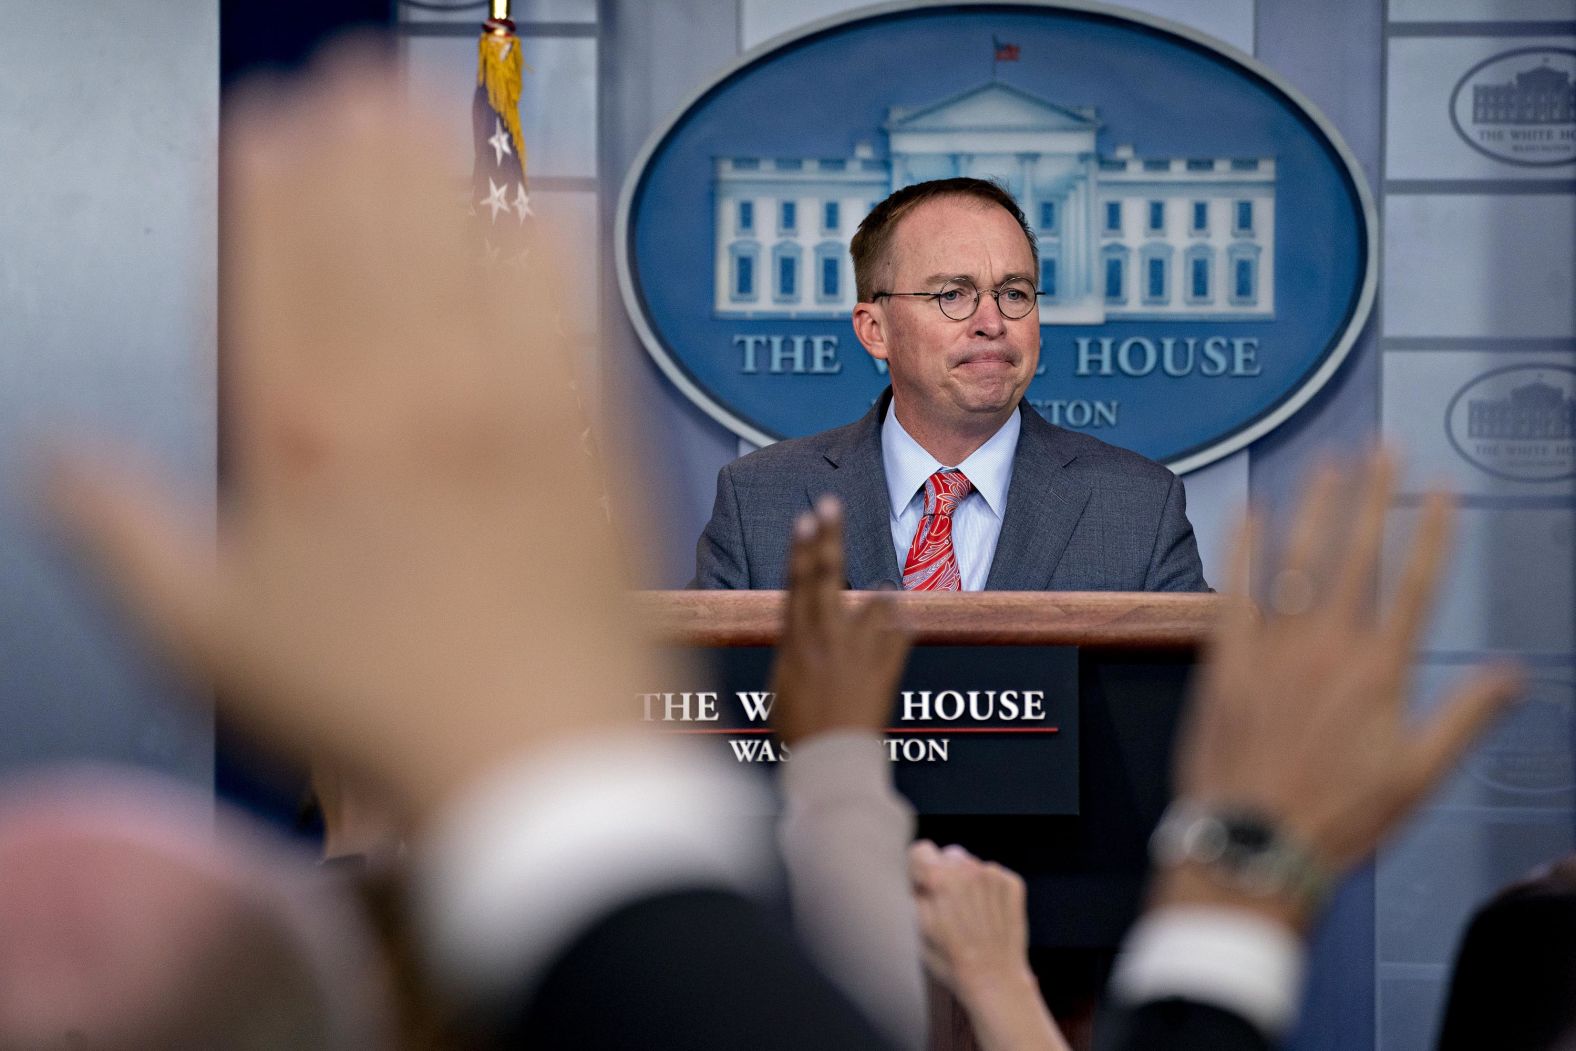 White House acting chief of staff Mick Mulvaney pauses for a question during a White House news conference on October 17. After weeks during which Trump denied the existence of any political quid pro quo in his withholding of security aid to Ukraine, <a href="https://www.cnn.com/2019/10/17/politics/mick-mulvaney-quid-pro-quo-donald-trump-ukraine-aid/index.html" target="_blank">Mulvaney confirmed the existence of a quid pro quo</a> and offered this retort: "Get over it." Later that day, Mulvaney attempted to claim that he did not admit to the quid pro quo.